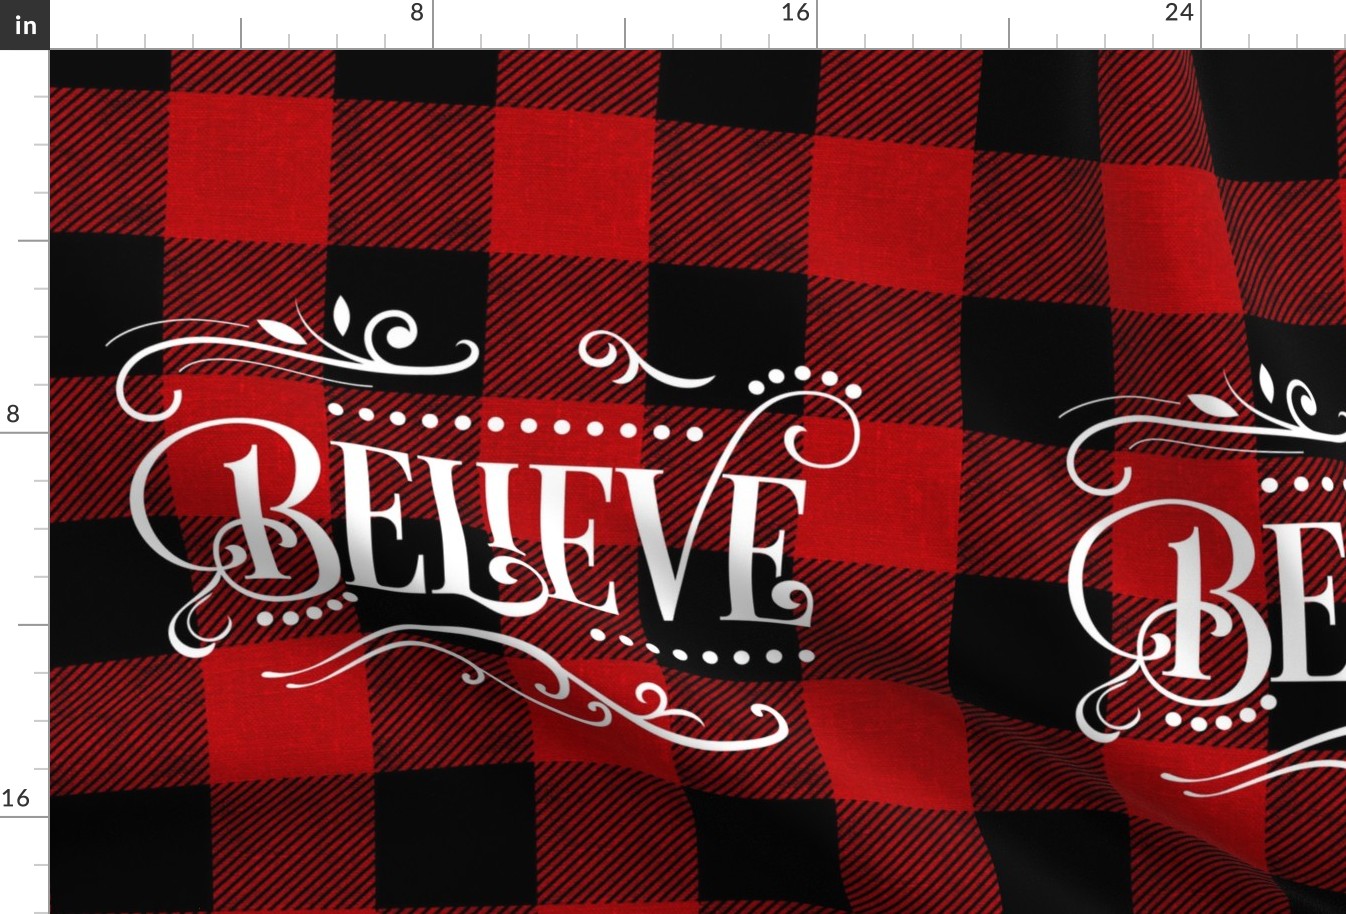 Believe on Red Plaid - 18 inch square sham